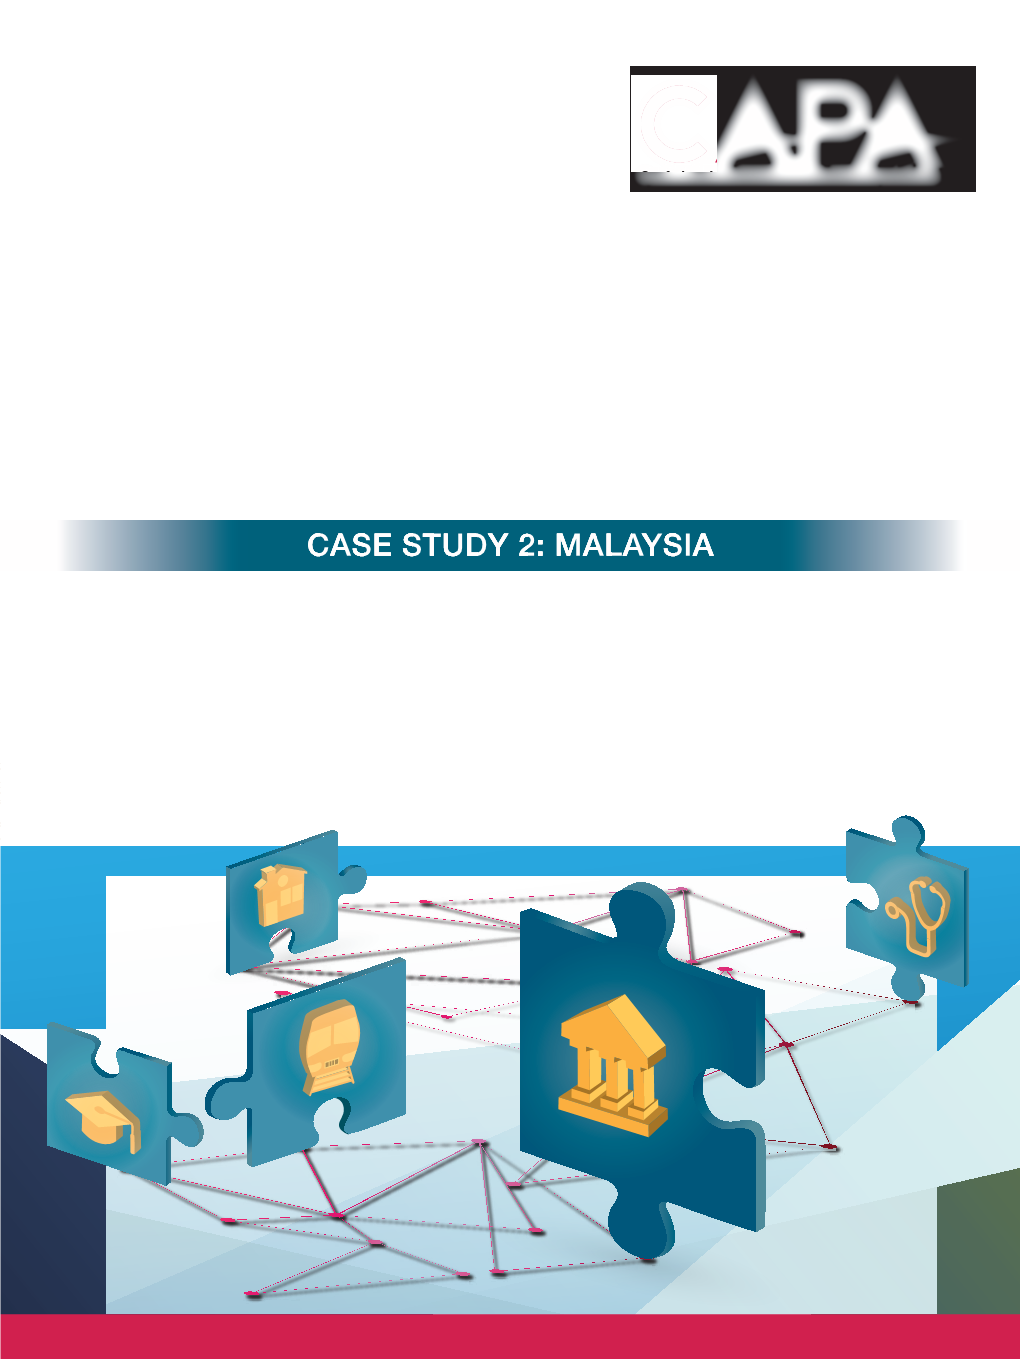 MALAYSIA in May 2019, CAPA Issued a Publication Titled ‘Professional Accountancy Organisations - Engaging with the Public Sector’